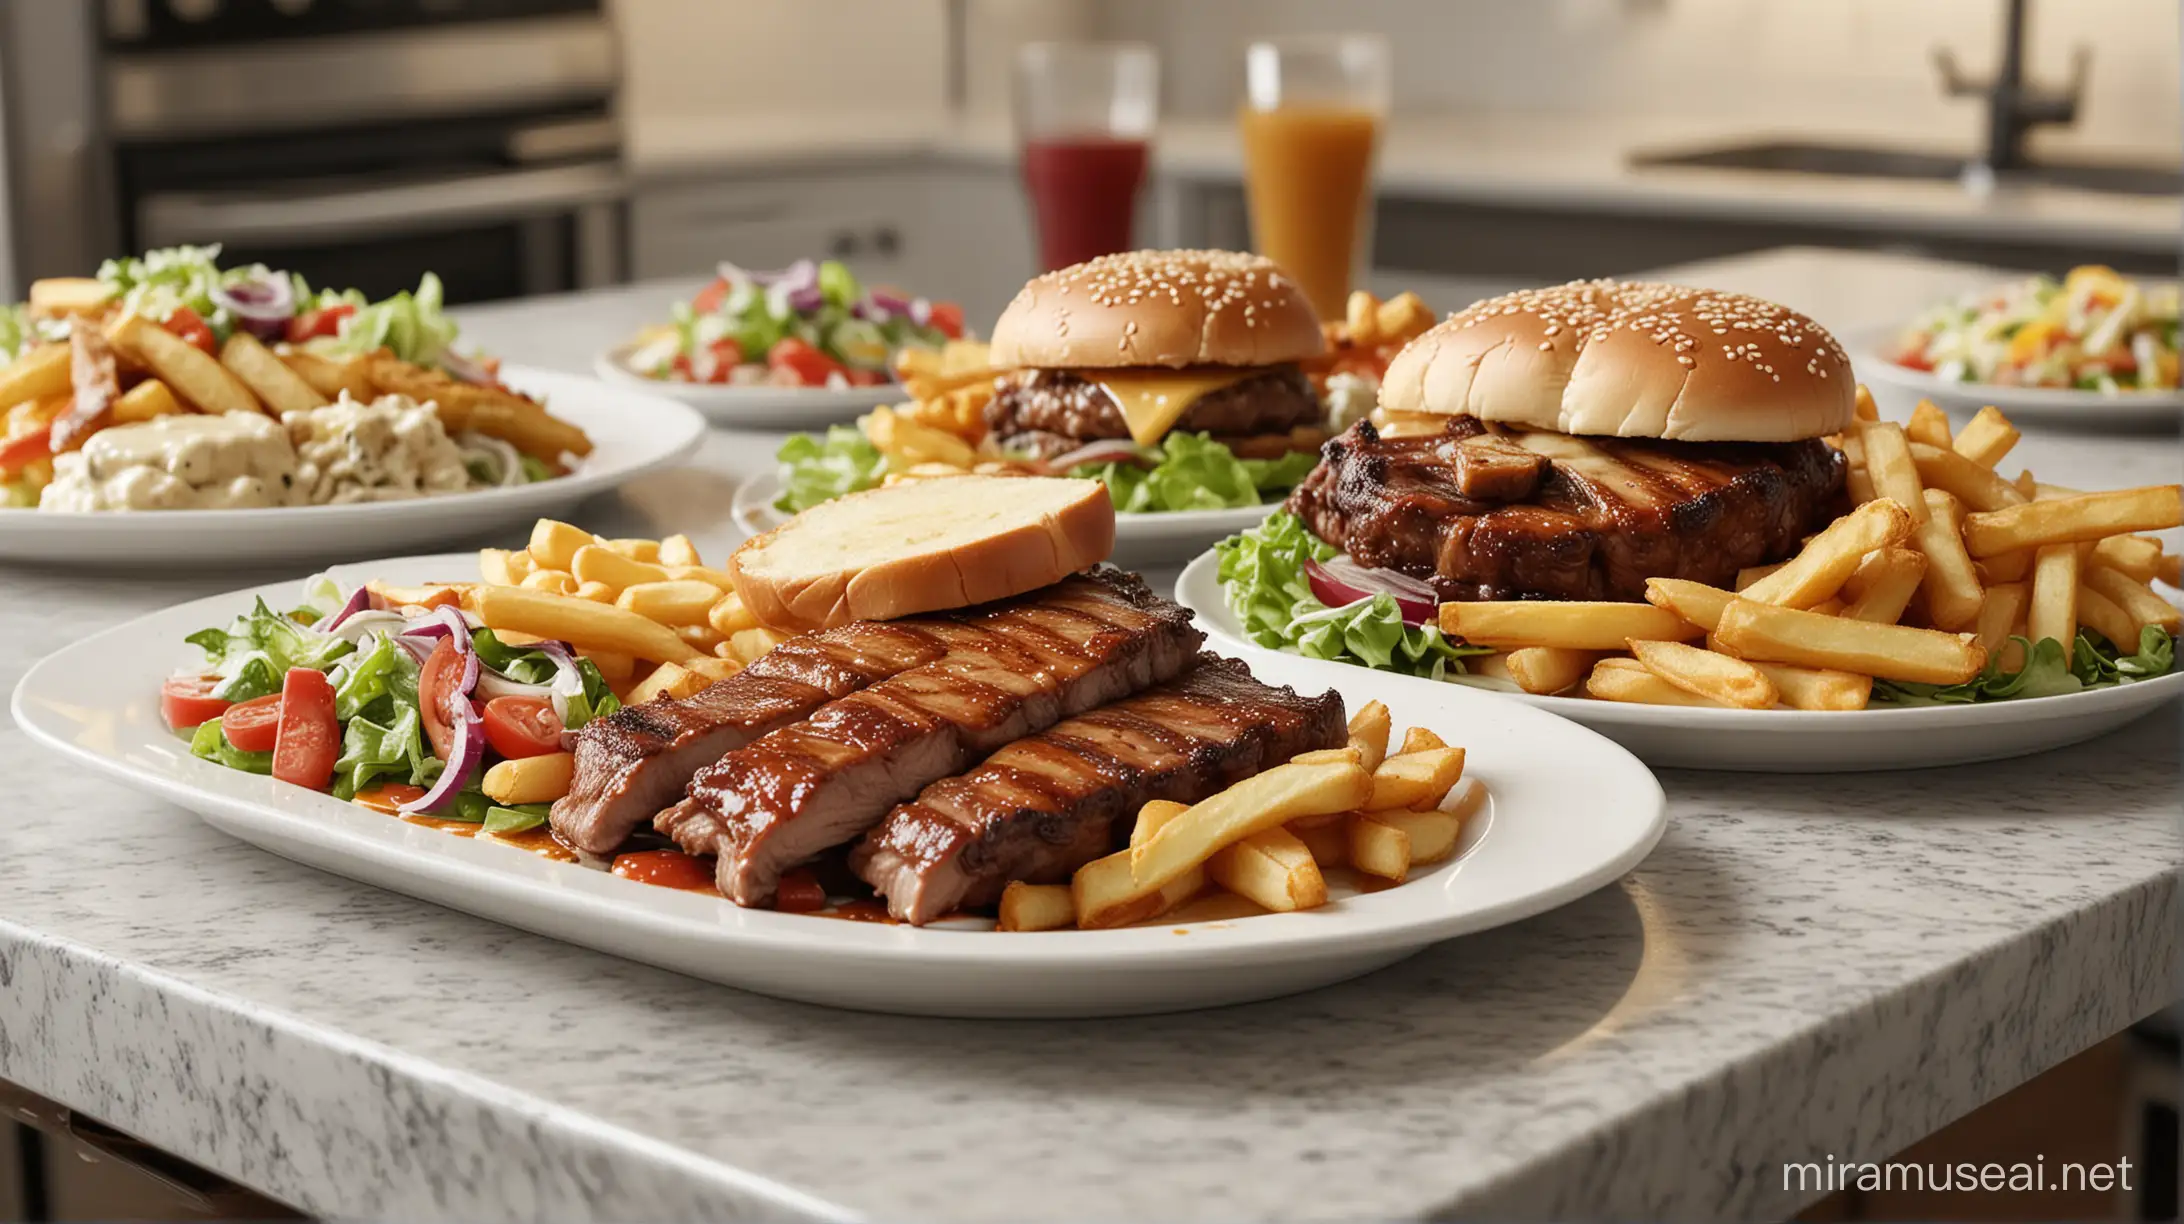 Savor Delicious Plated Meals Ribs Burgers and Fresh Salad on White Granite Kitchen Counter